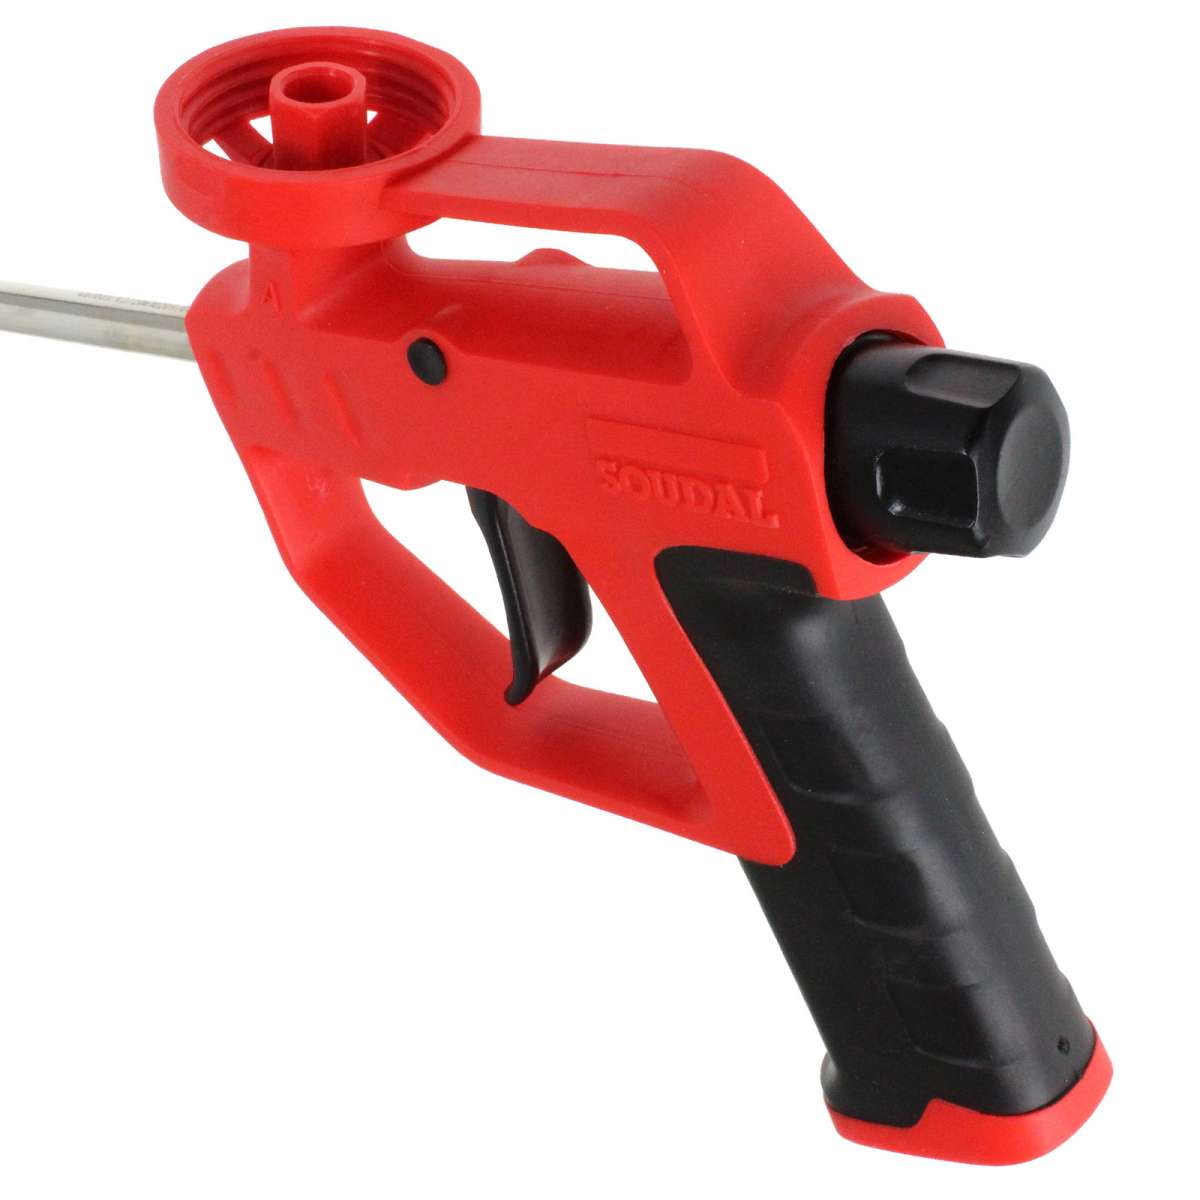 Soudal Expanding Foam CombiBox with Applicator Gun and Cleaner Truly PVC